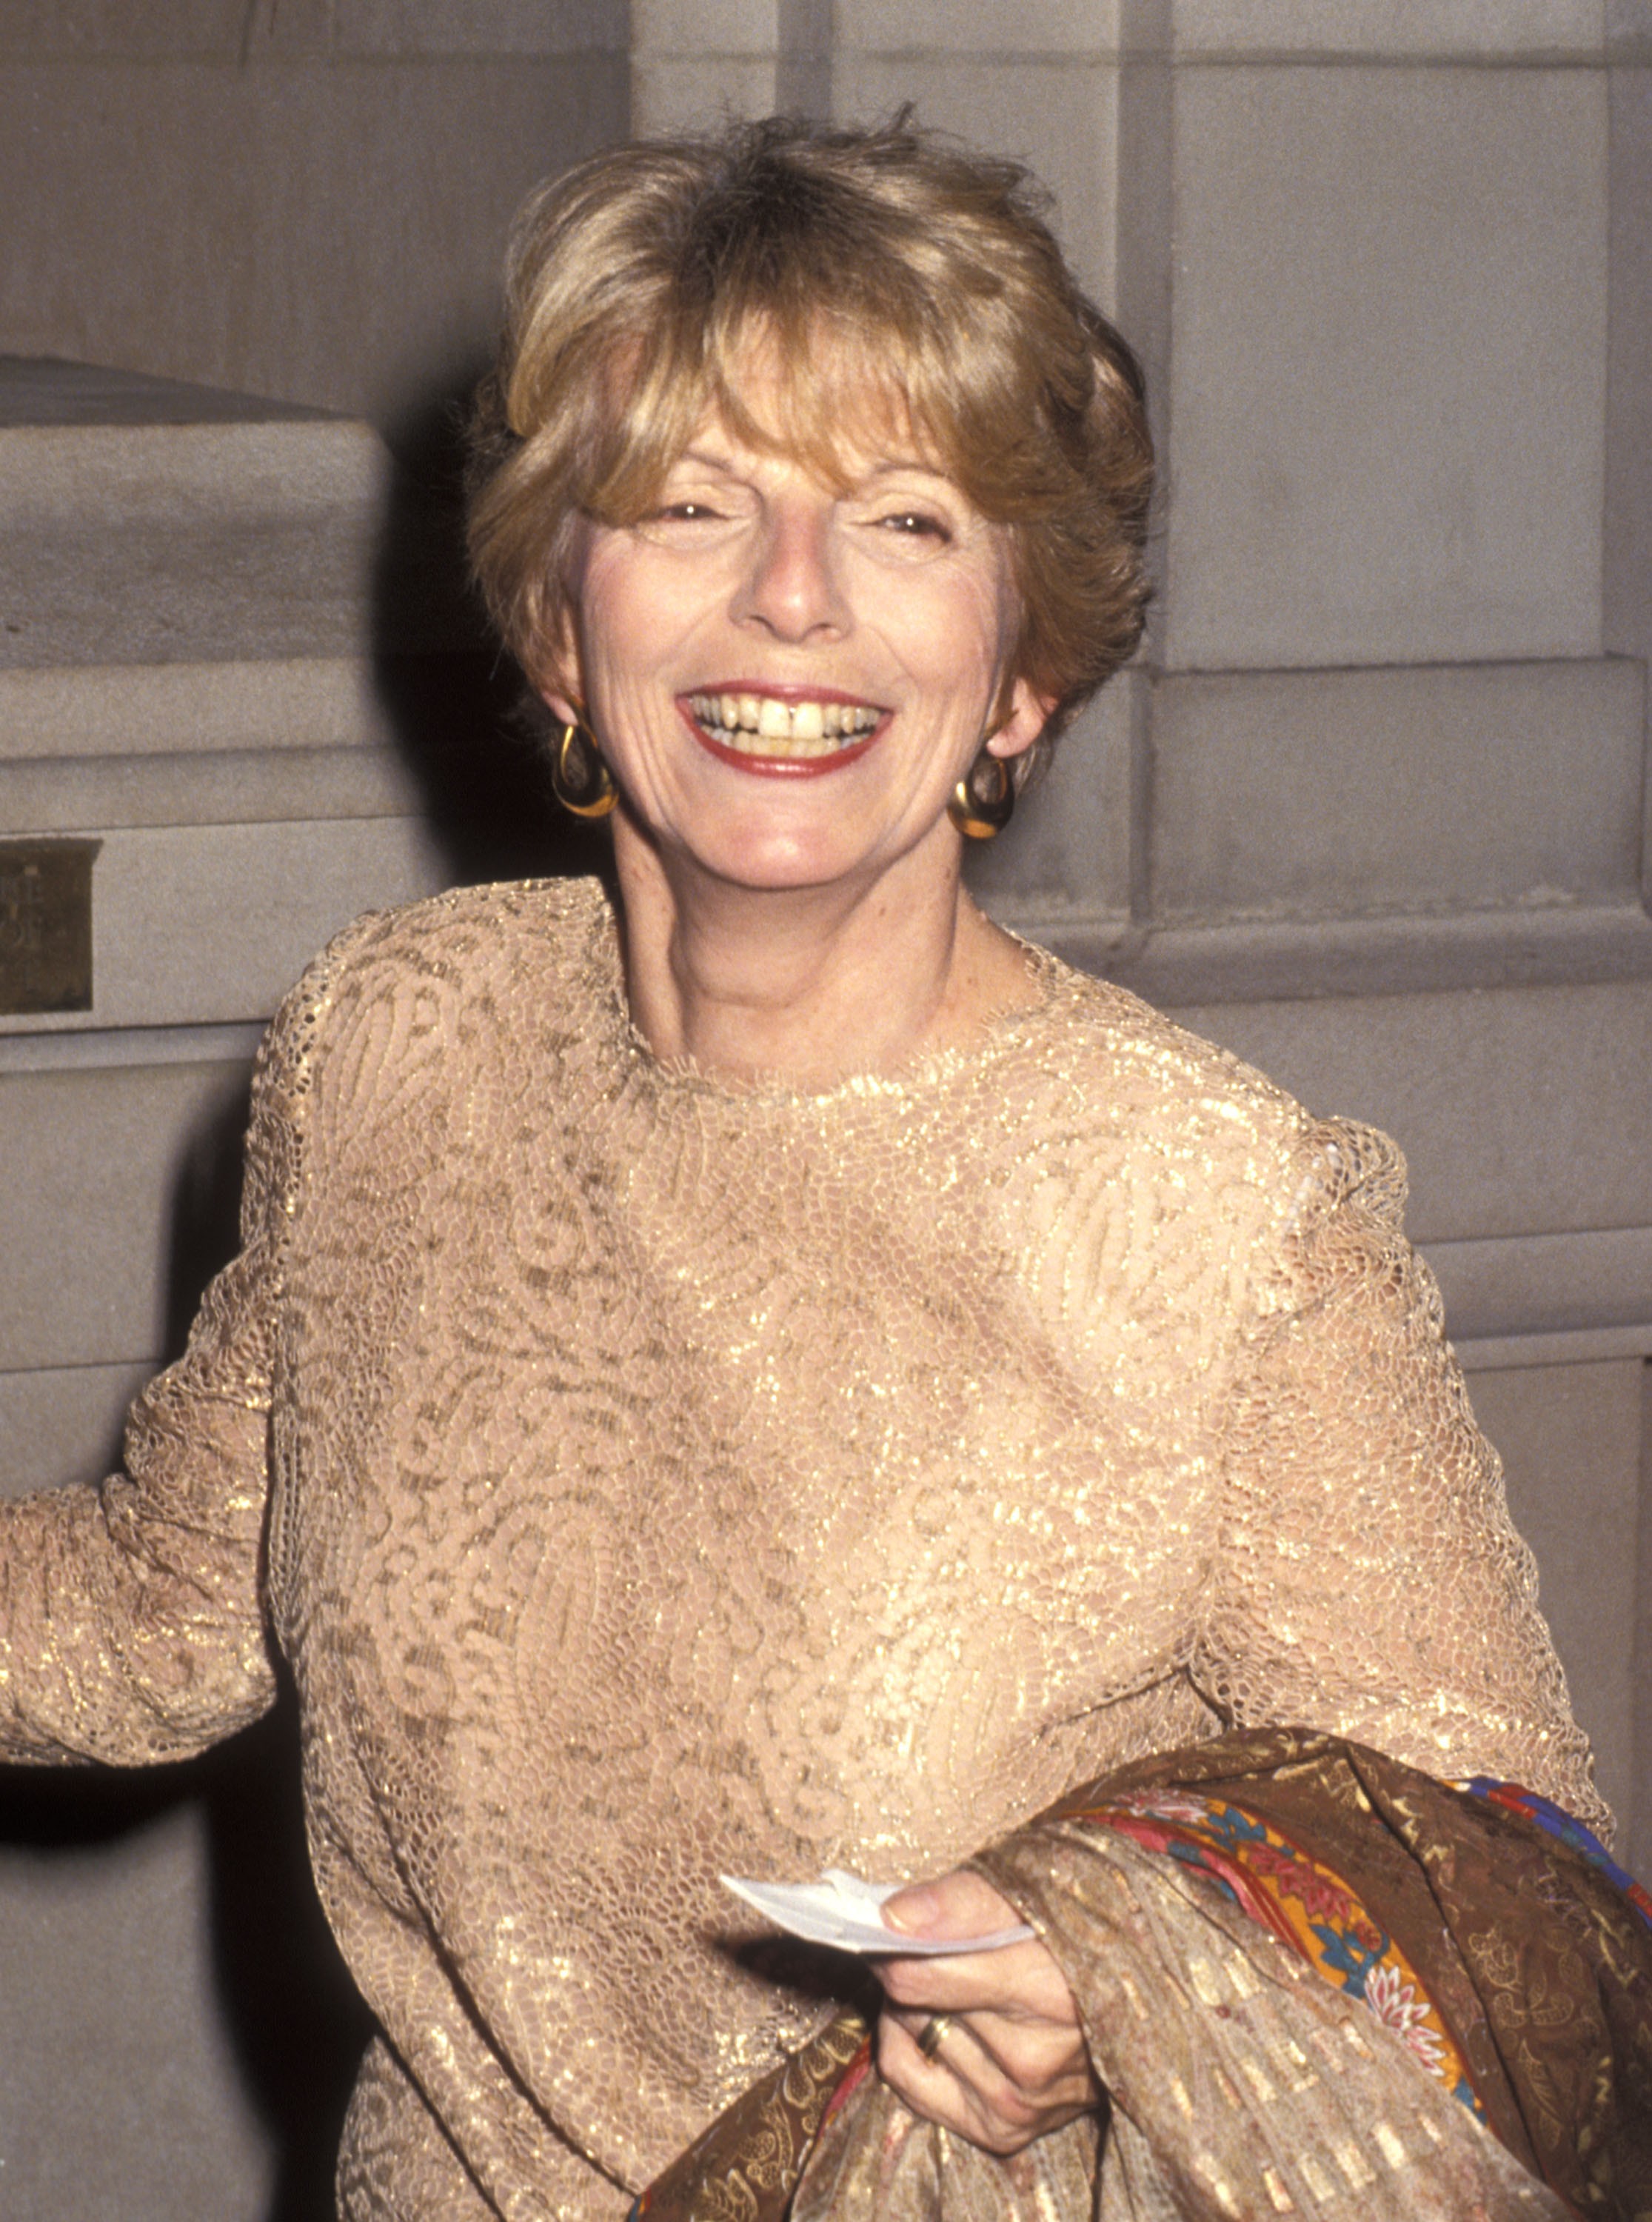 NEW YORK - DECEMBER 7:   Fashion editor Grace Mirabella attends The Metropolitan Museum's Costume Institute Gala to Celebrate the Newly Instated Costume Insitute Galleries on December 7, 1992 at The Metropolitan Museum of Art in New York City. (Photo by R (Foto: Ron Galella Collection via Getty)